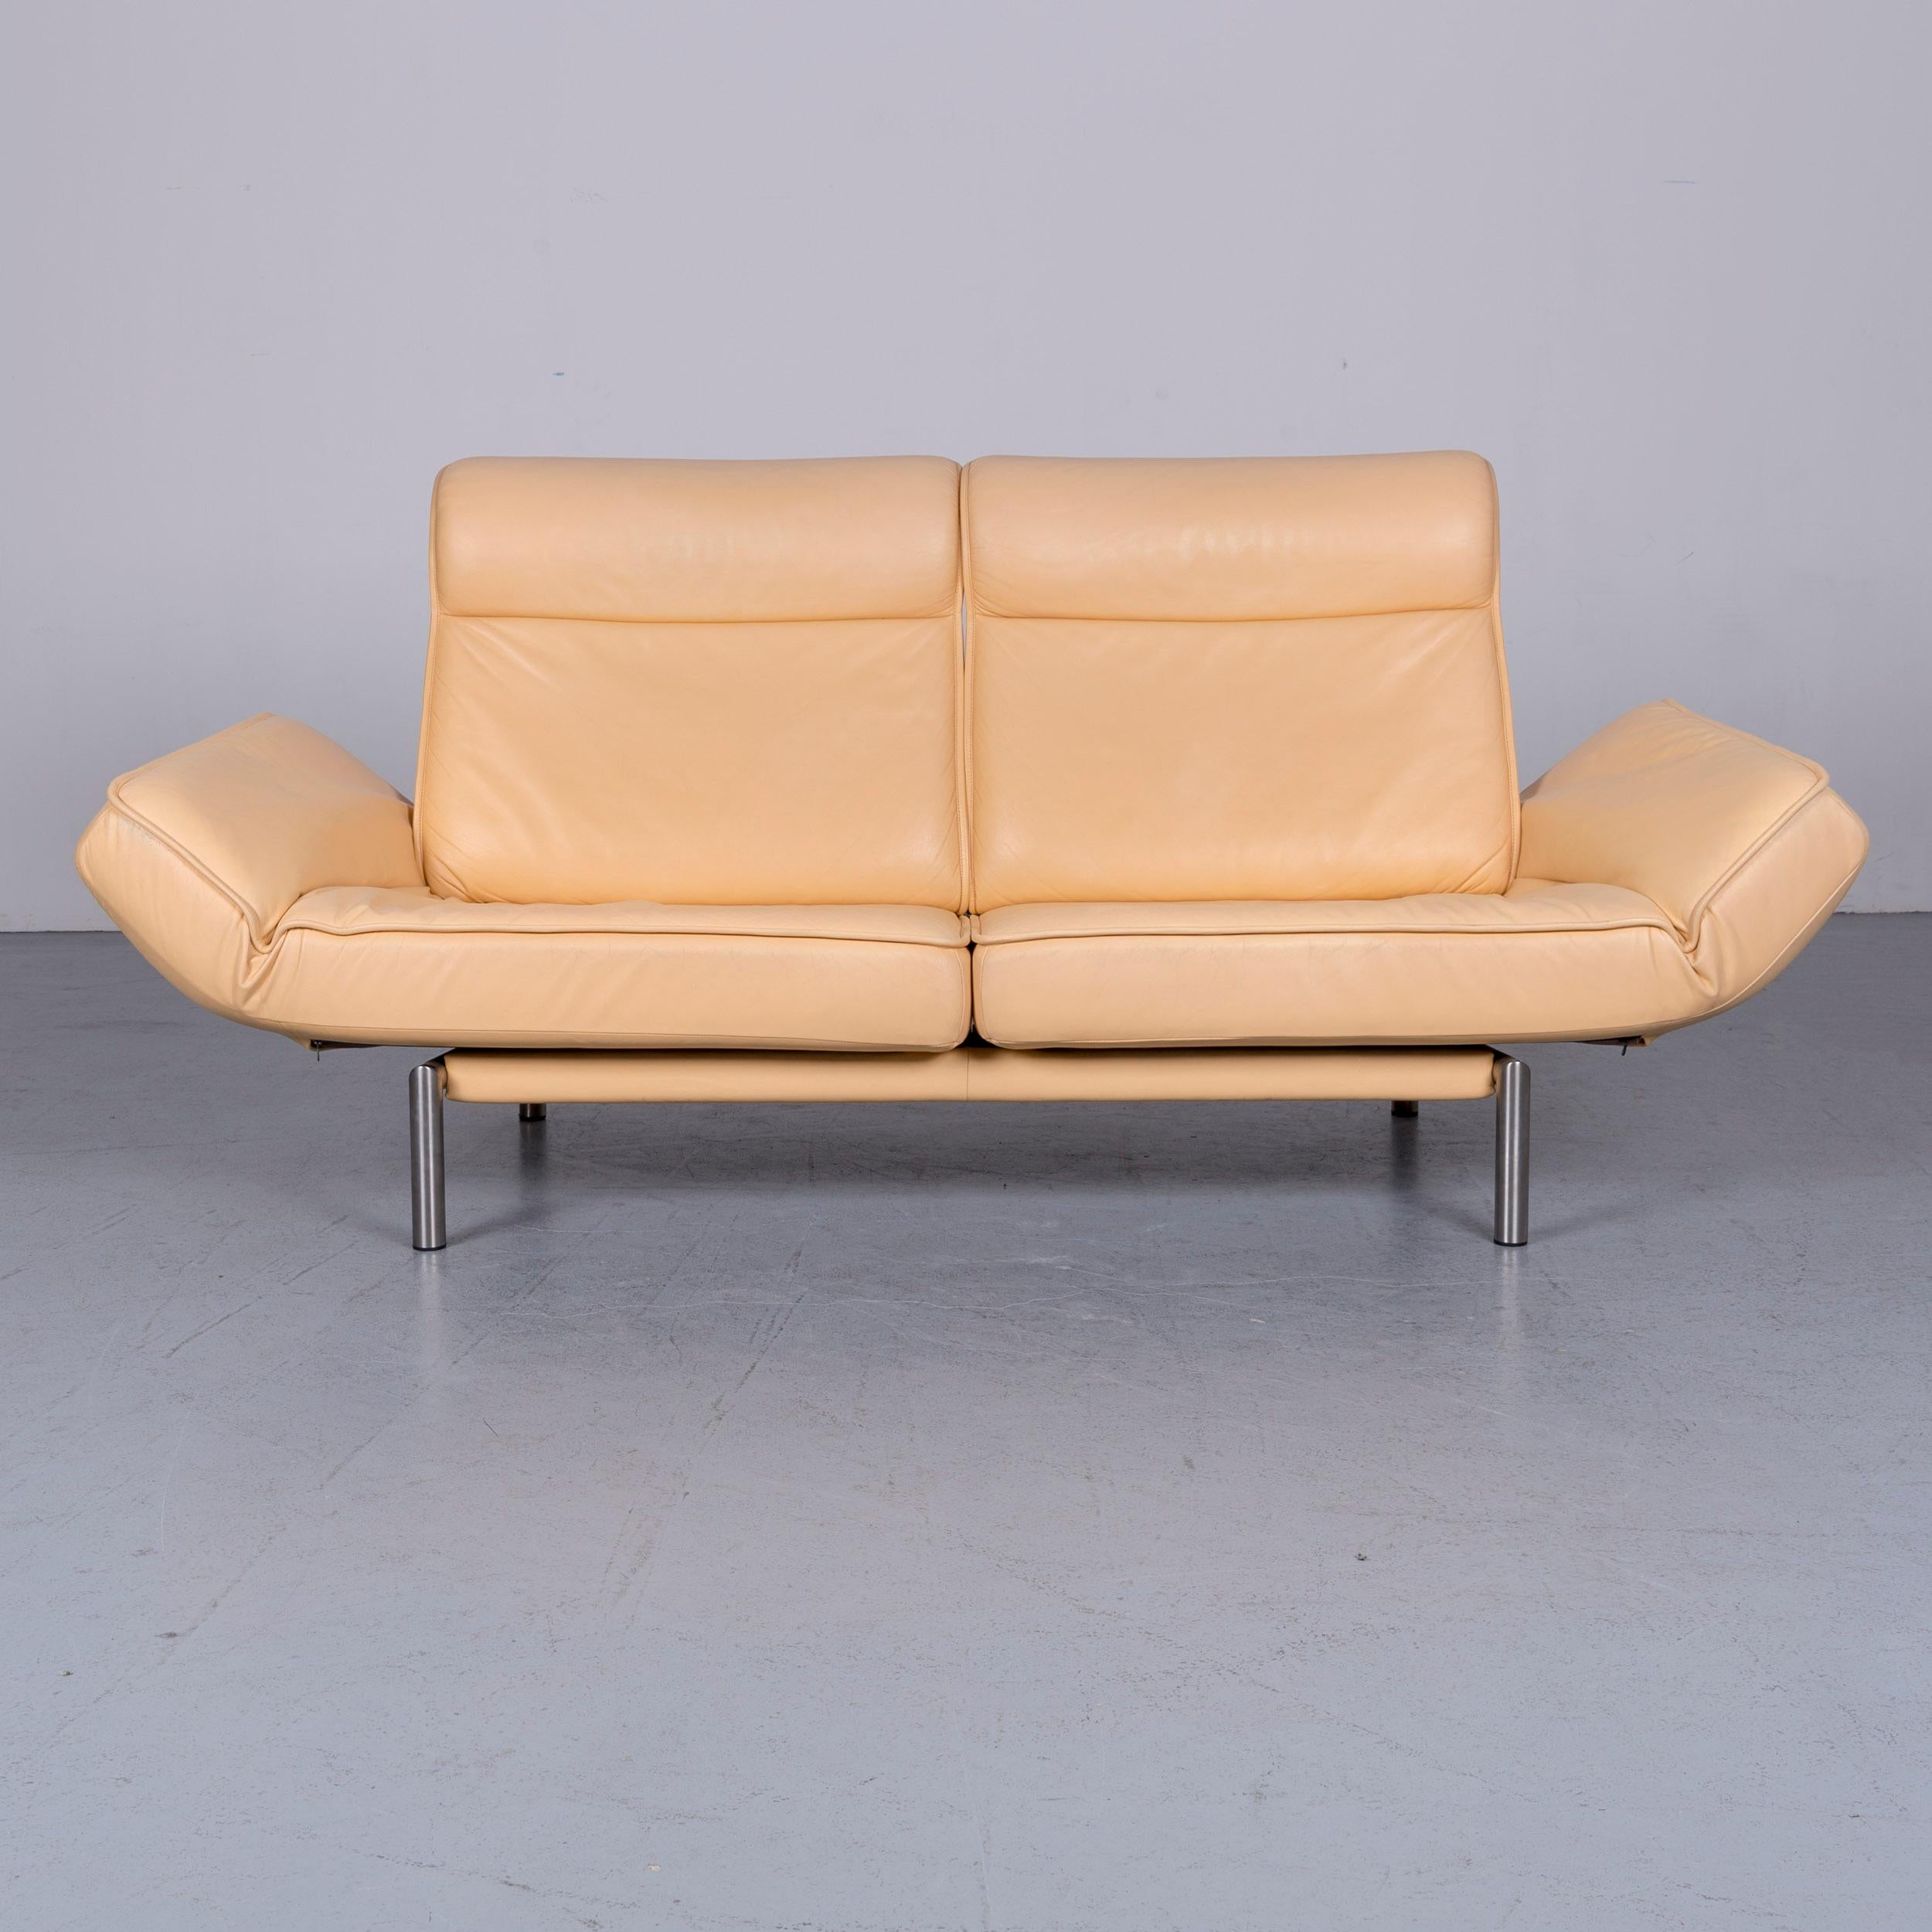 We bring to you an De Sede DS 450 designer sofa beige leather two-seat couch.